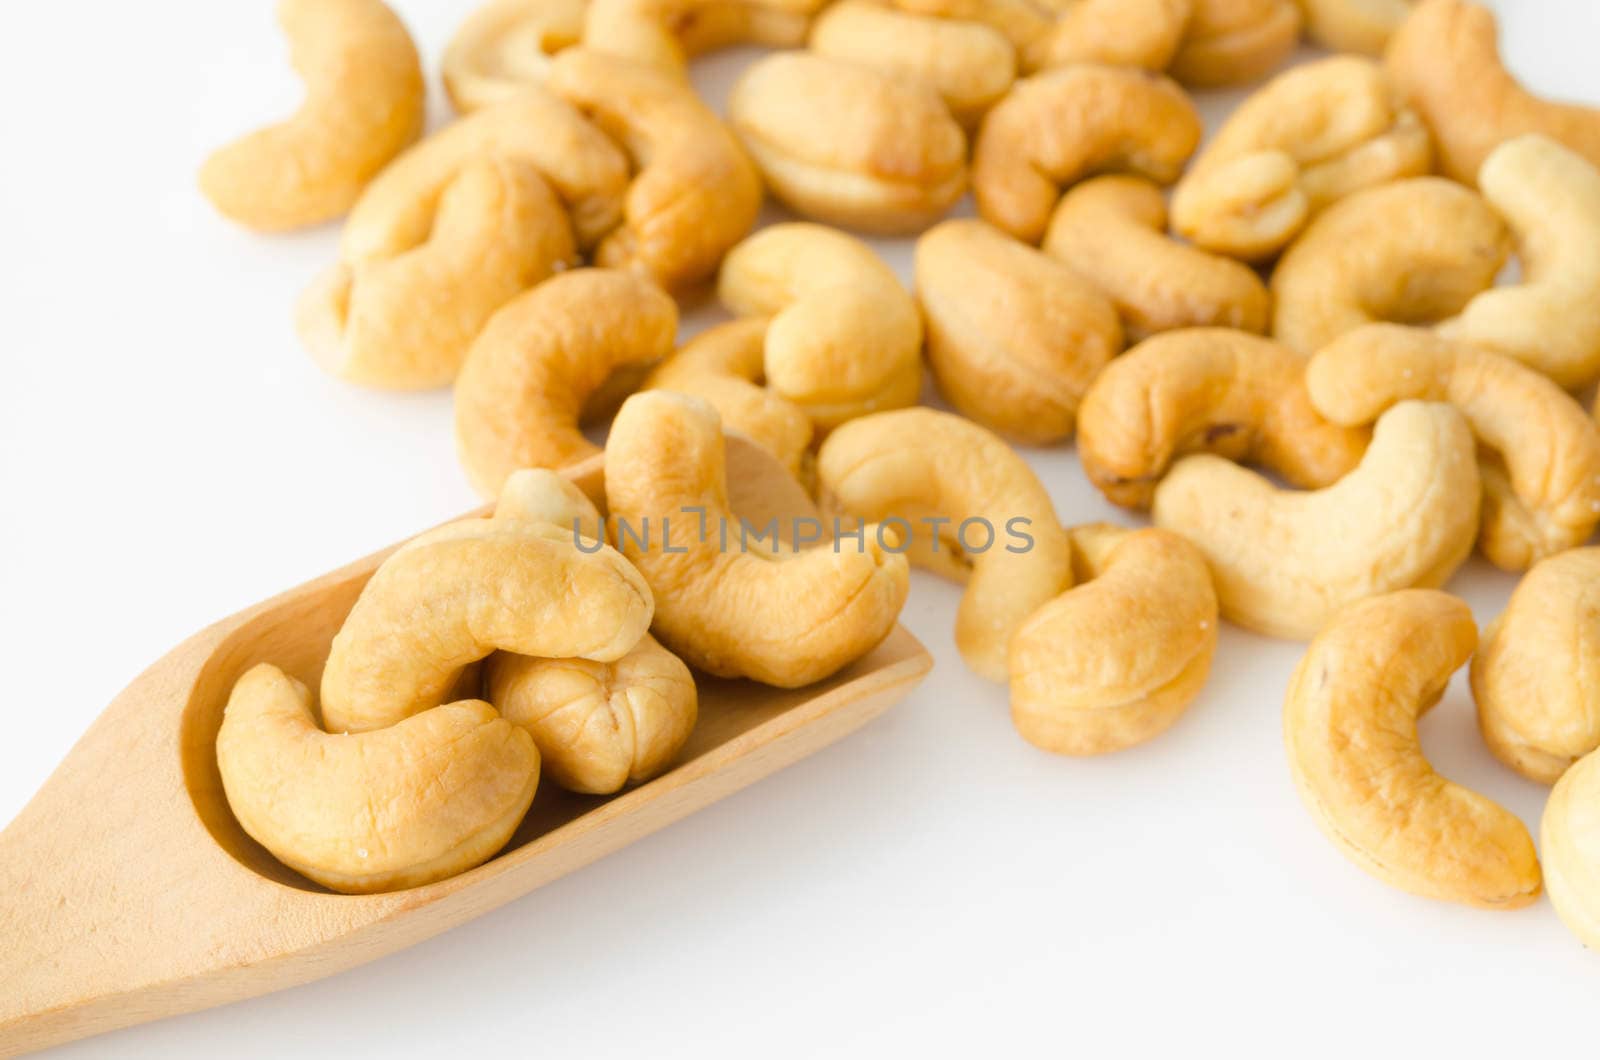 Cashew nuts in wooden spoon on white background.